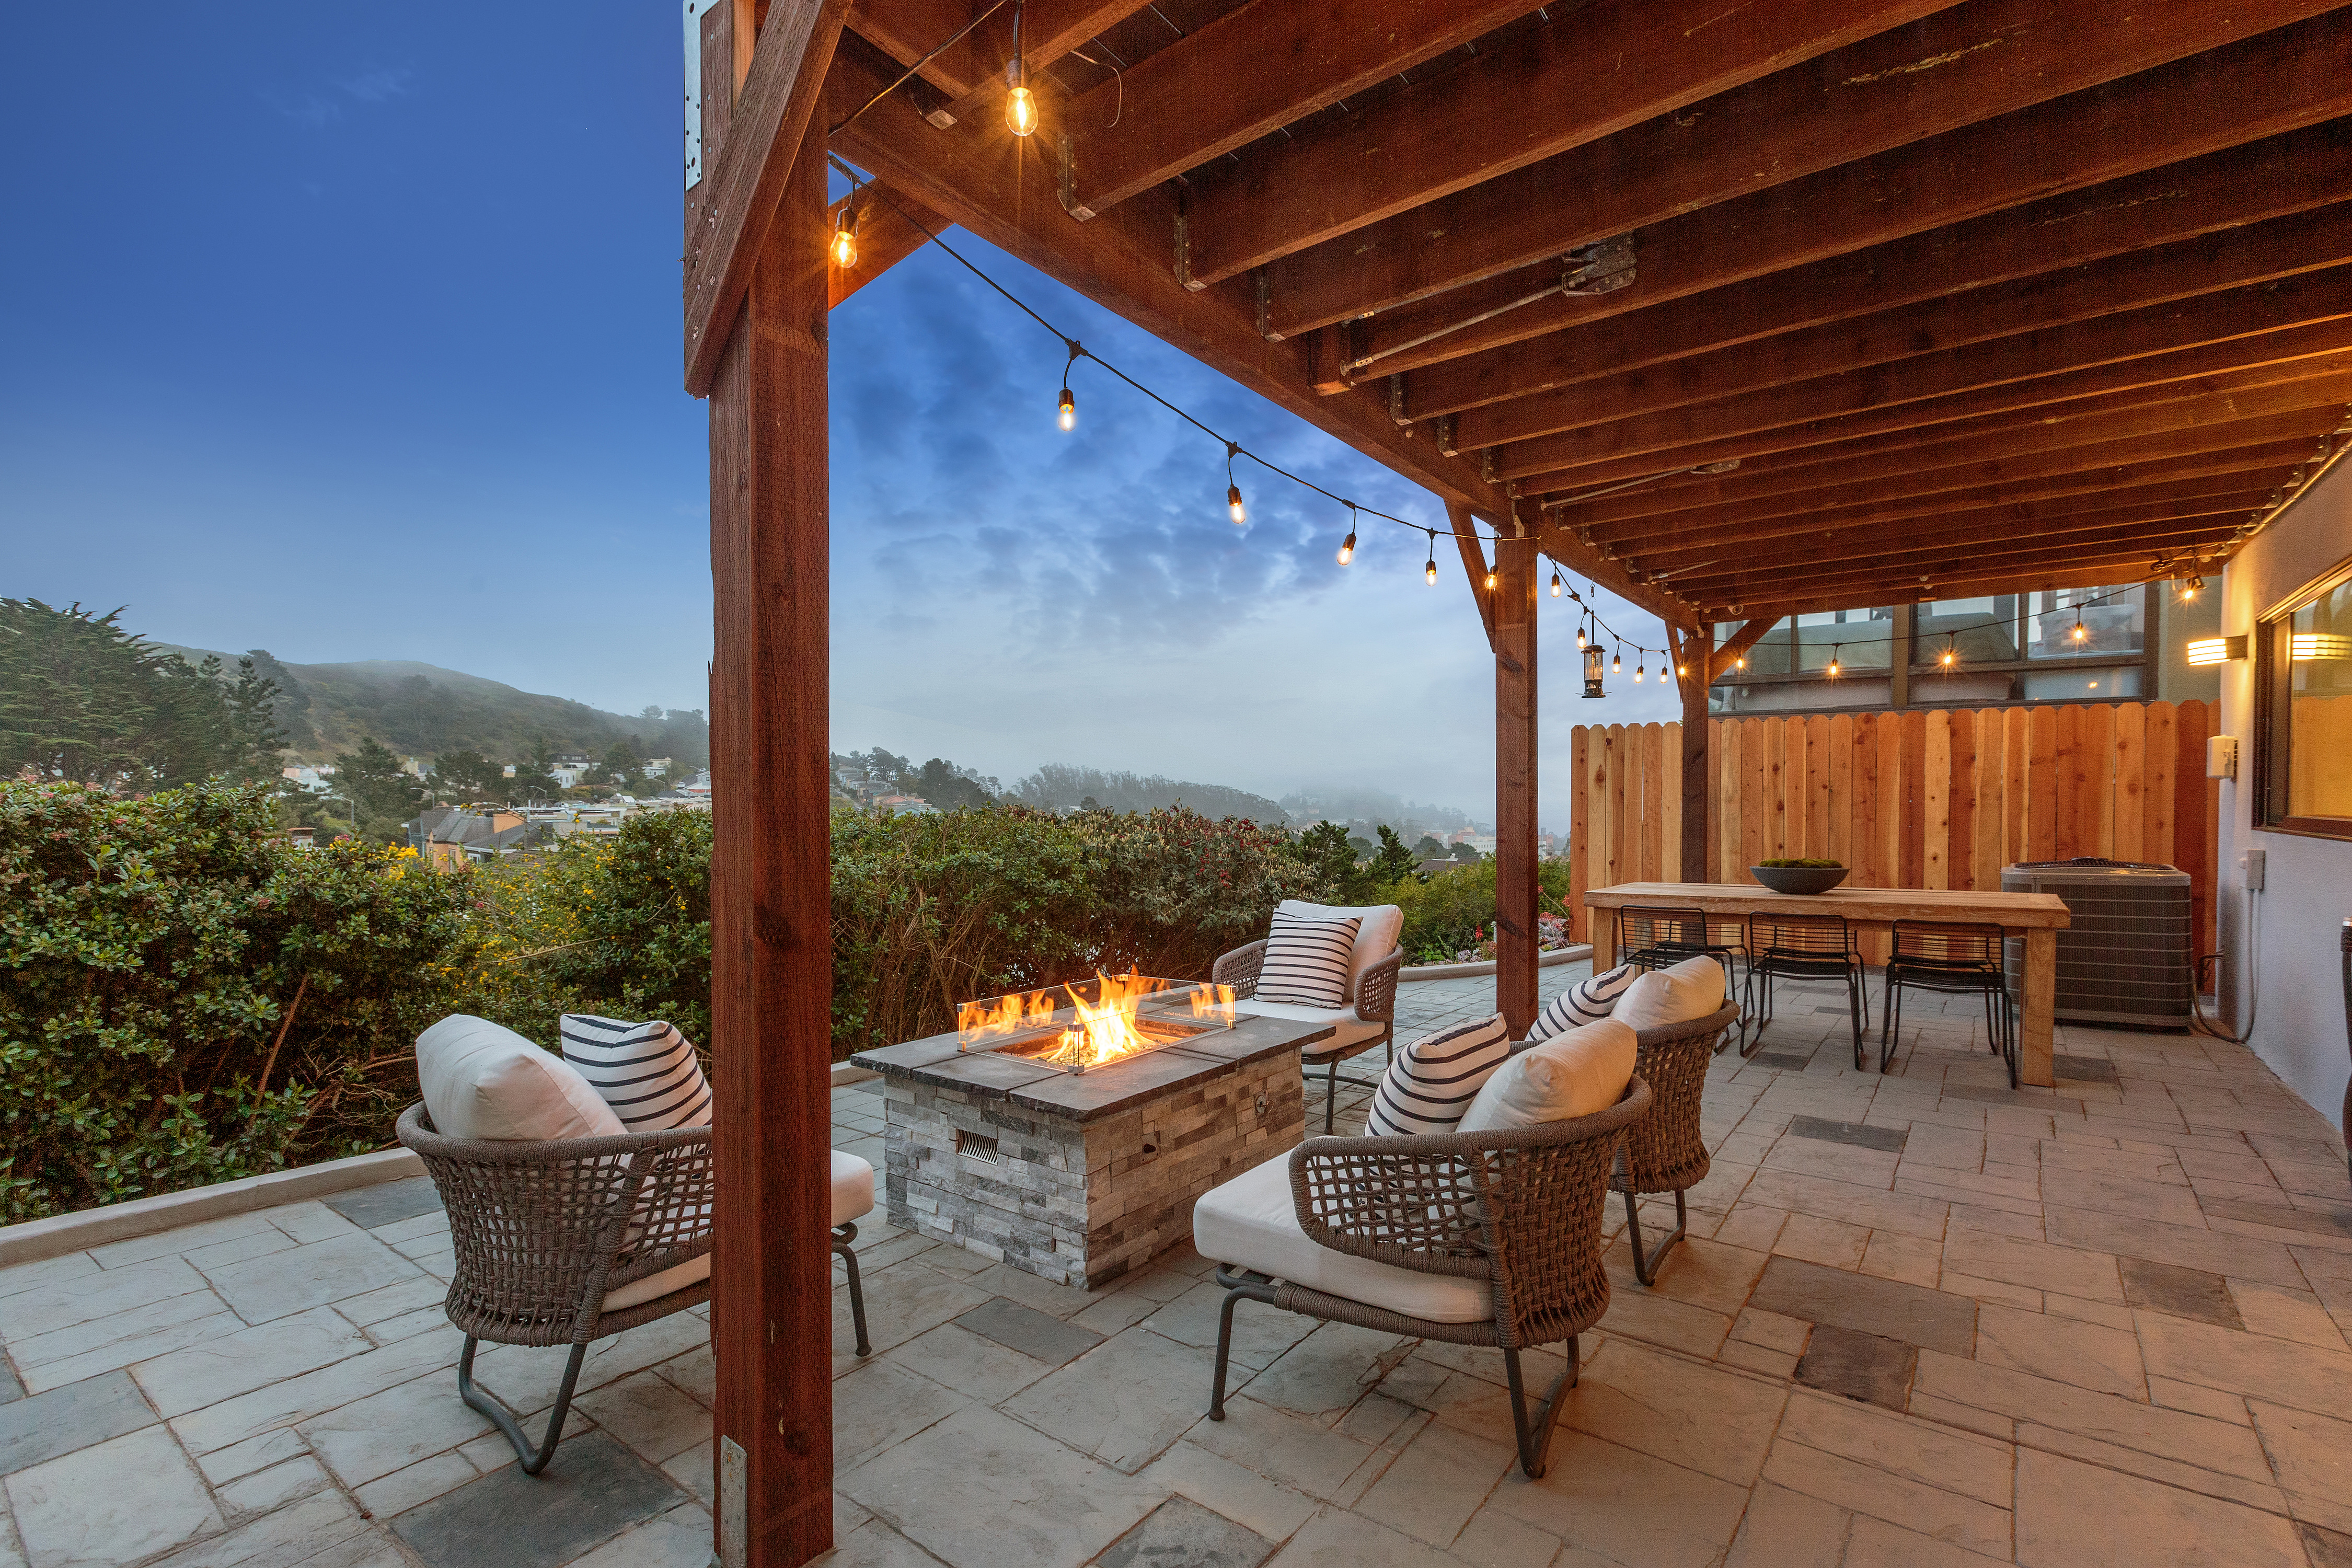 Property Photo: An outdoor fireplace and chairs with views of the city